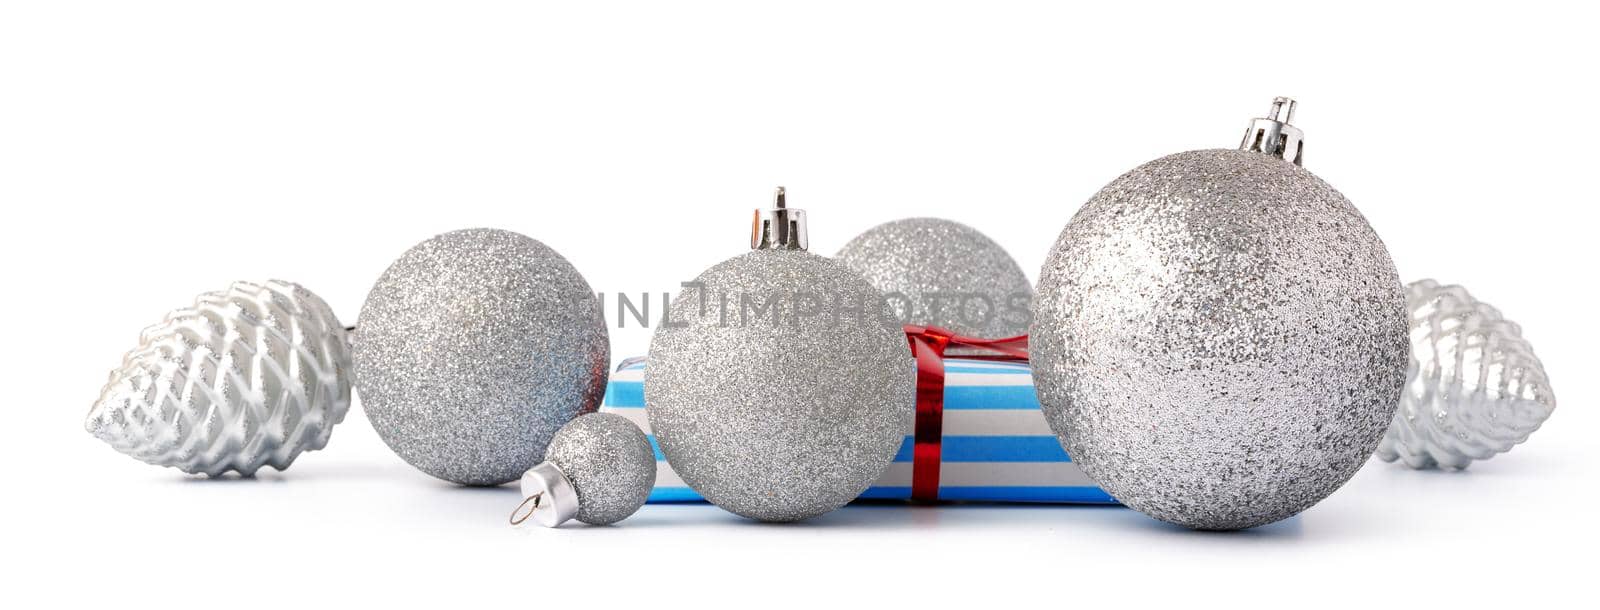 Christmas baubles and festive gift box isolated on white background by Fabrikasimf